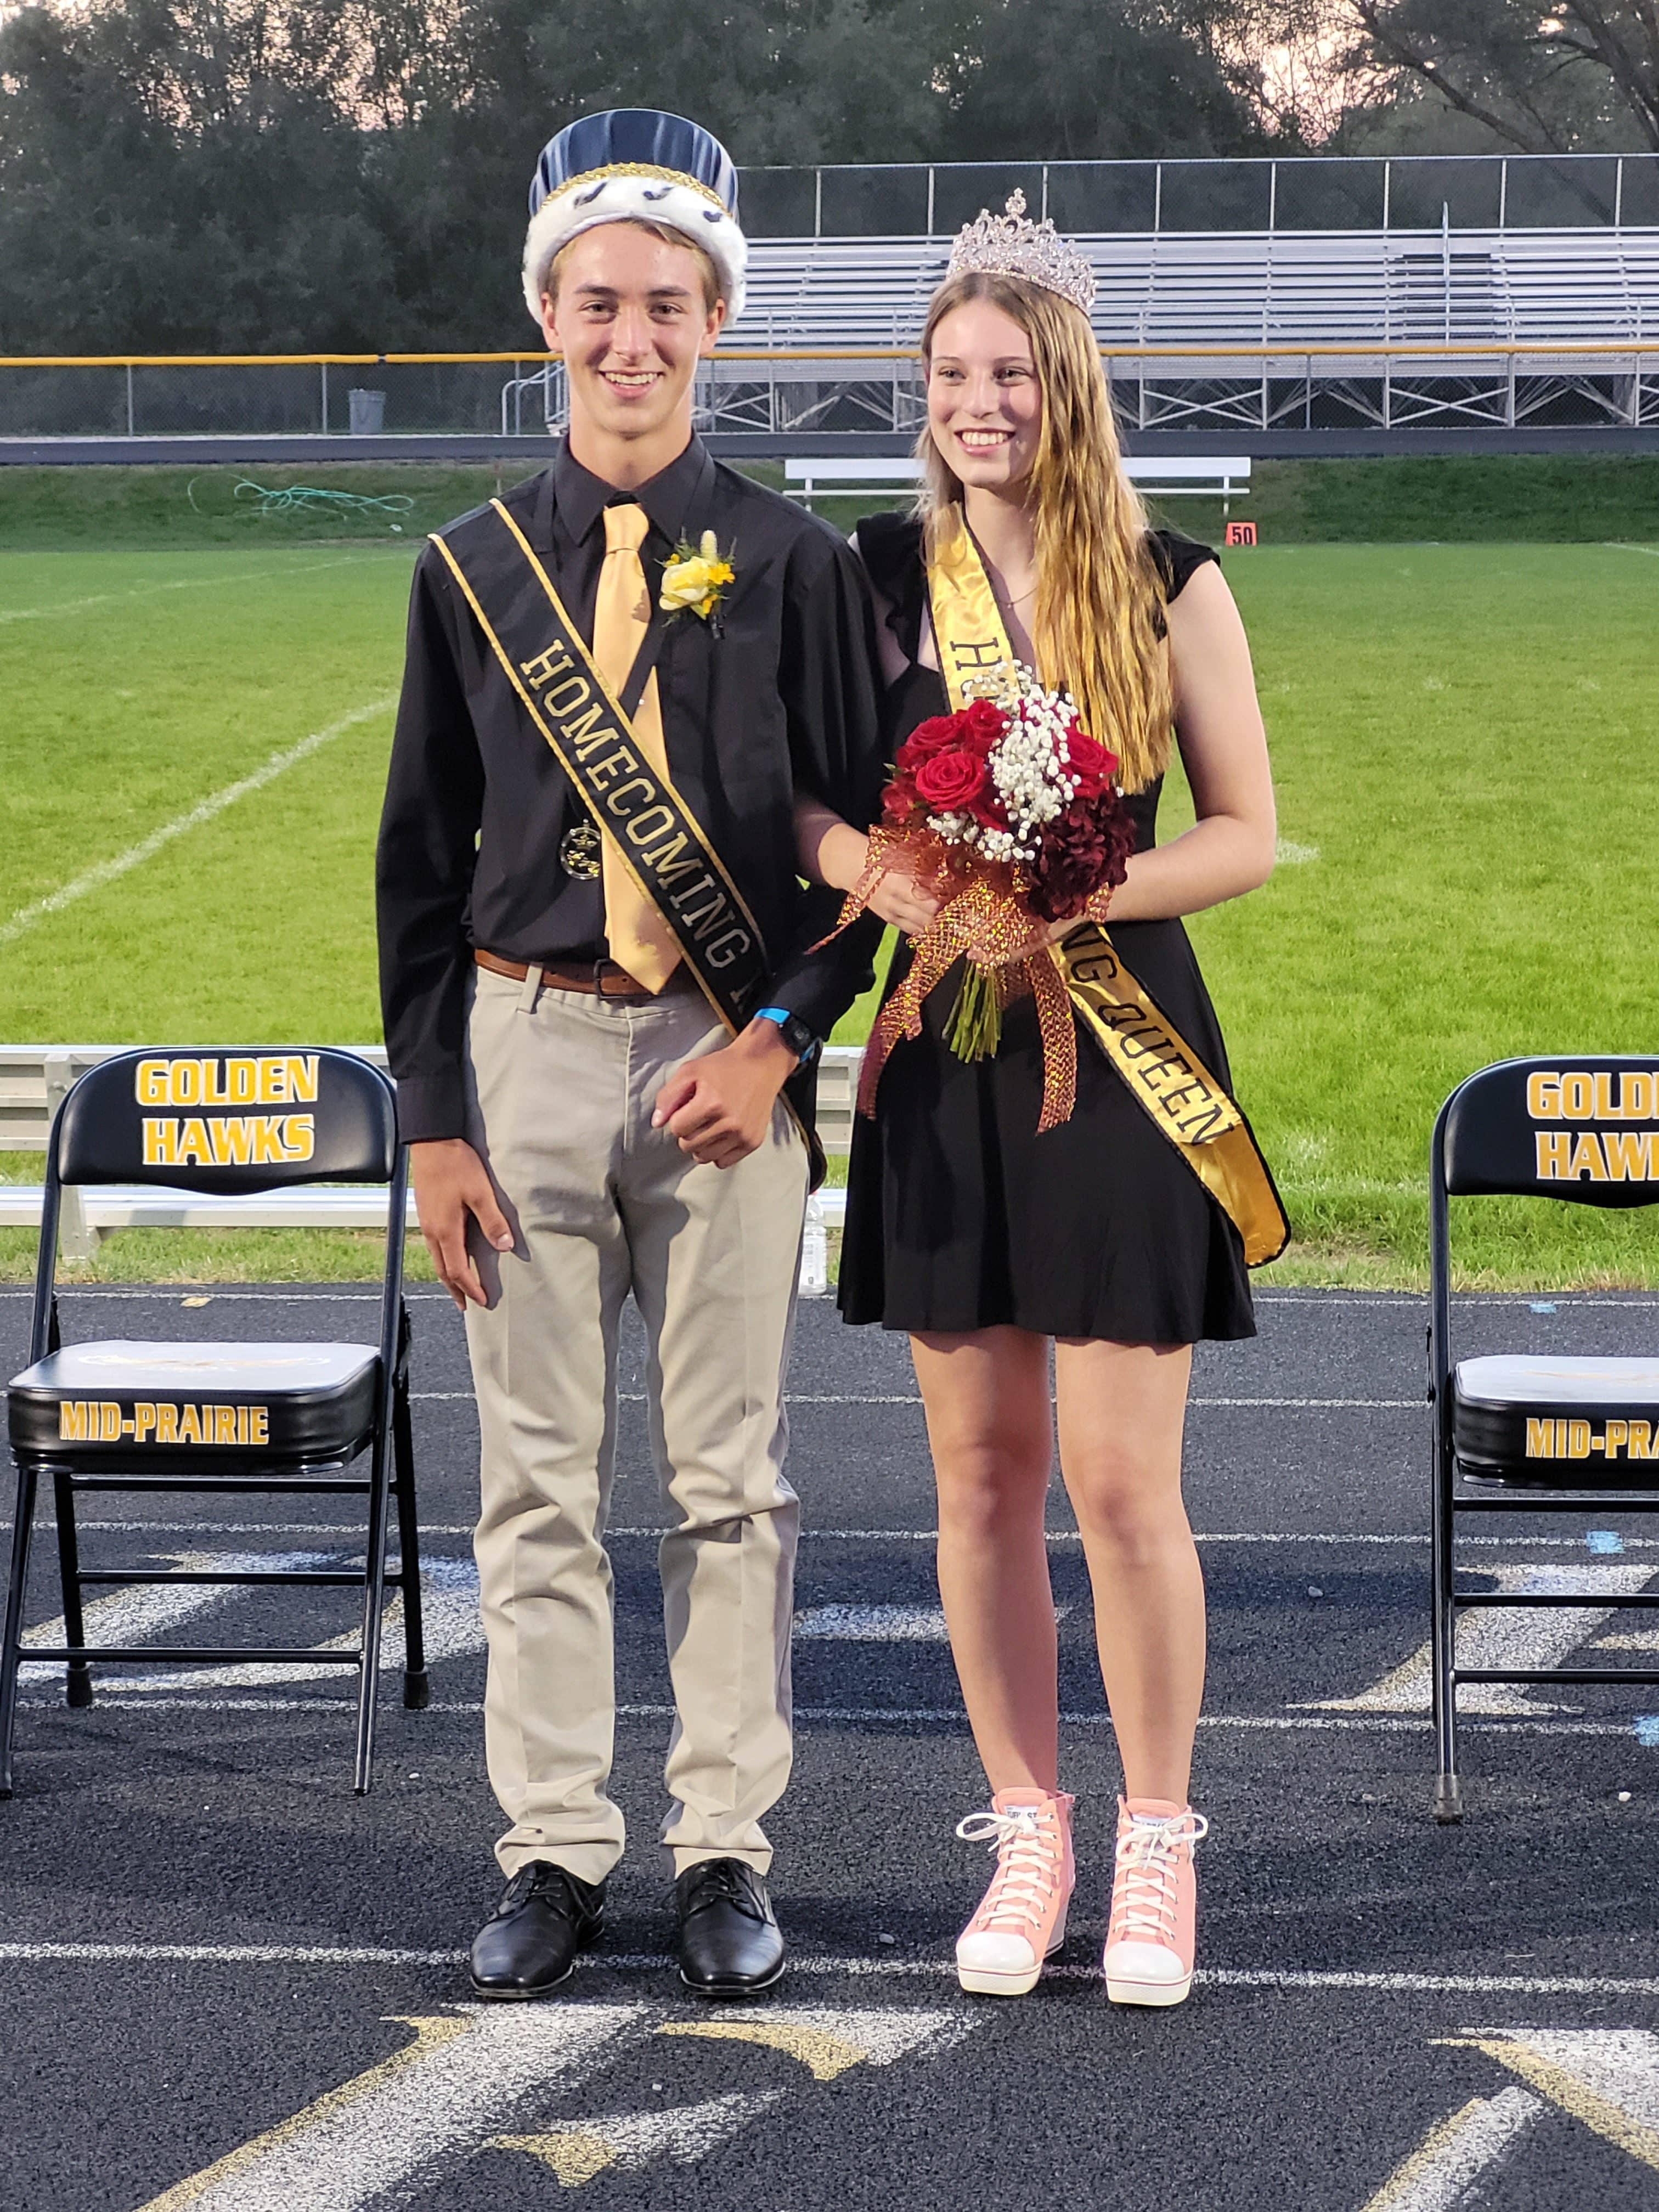 BREAKING NEWS MidPrairie Crowns 2021 King and Queen KCII